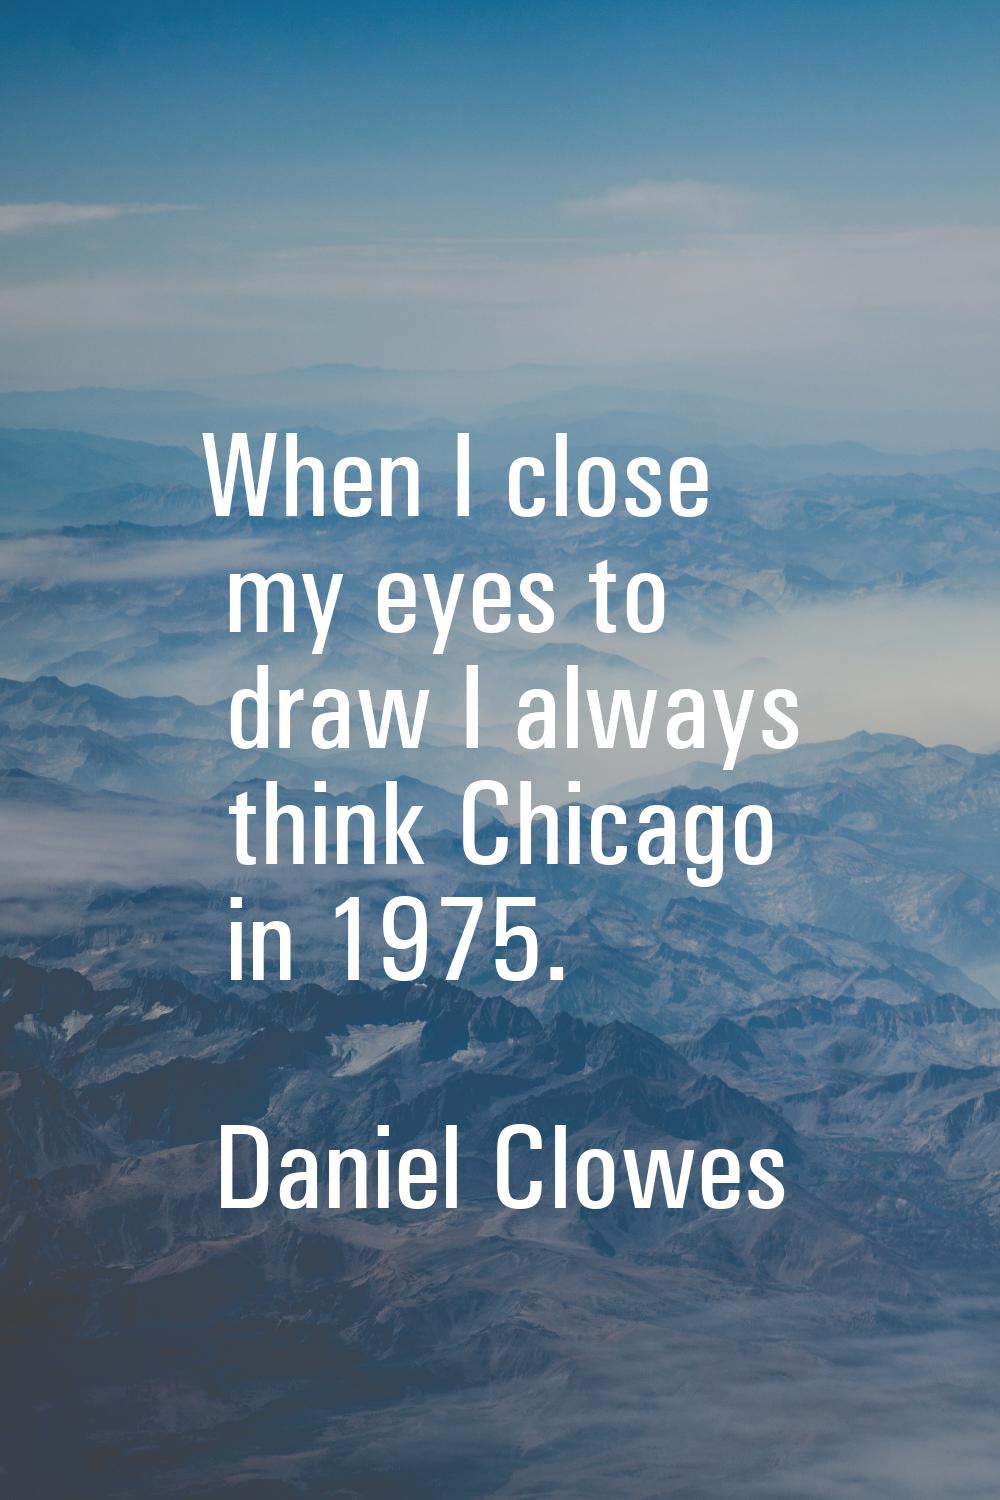 When I close my eyes to draw I always think Chicago in 1975.